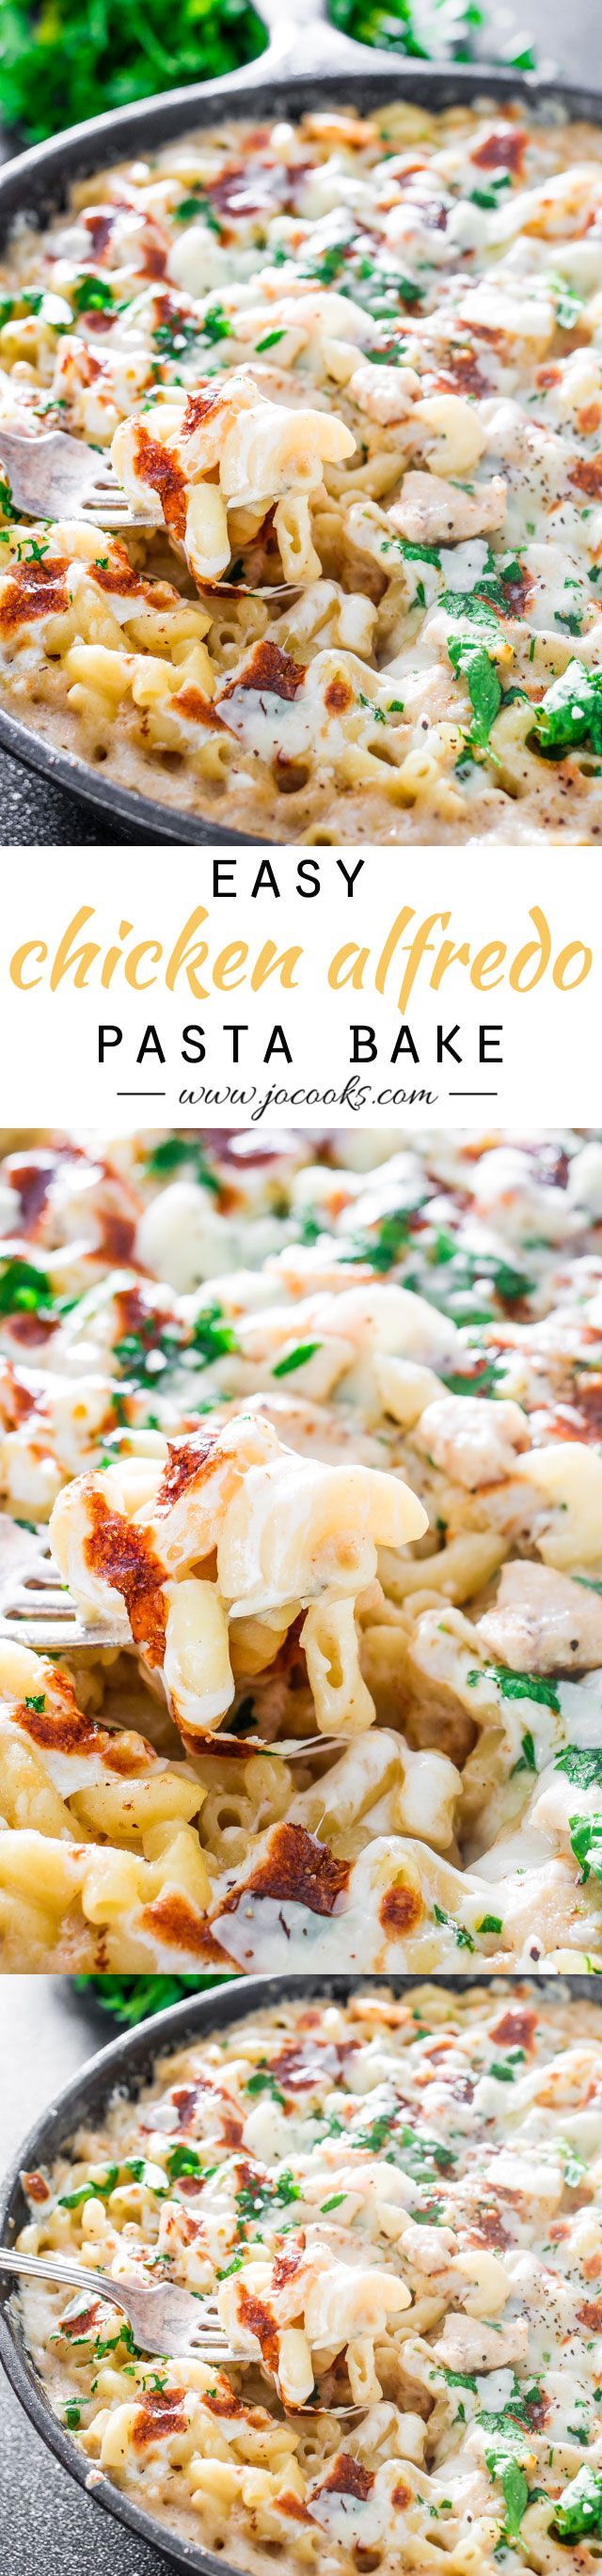 Easy Chicken Alfredo Pasta Bake – A delicious, no-fuss dinner that you can easily make at home with very few ingredients!